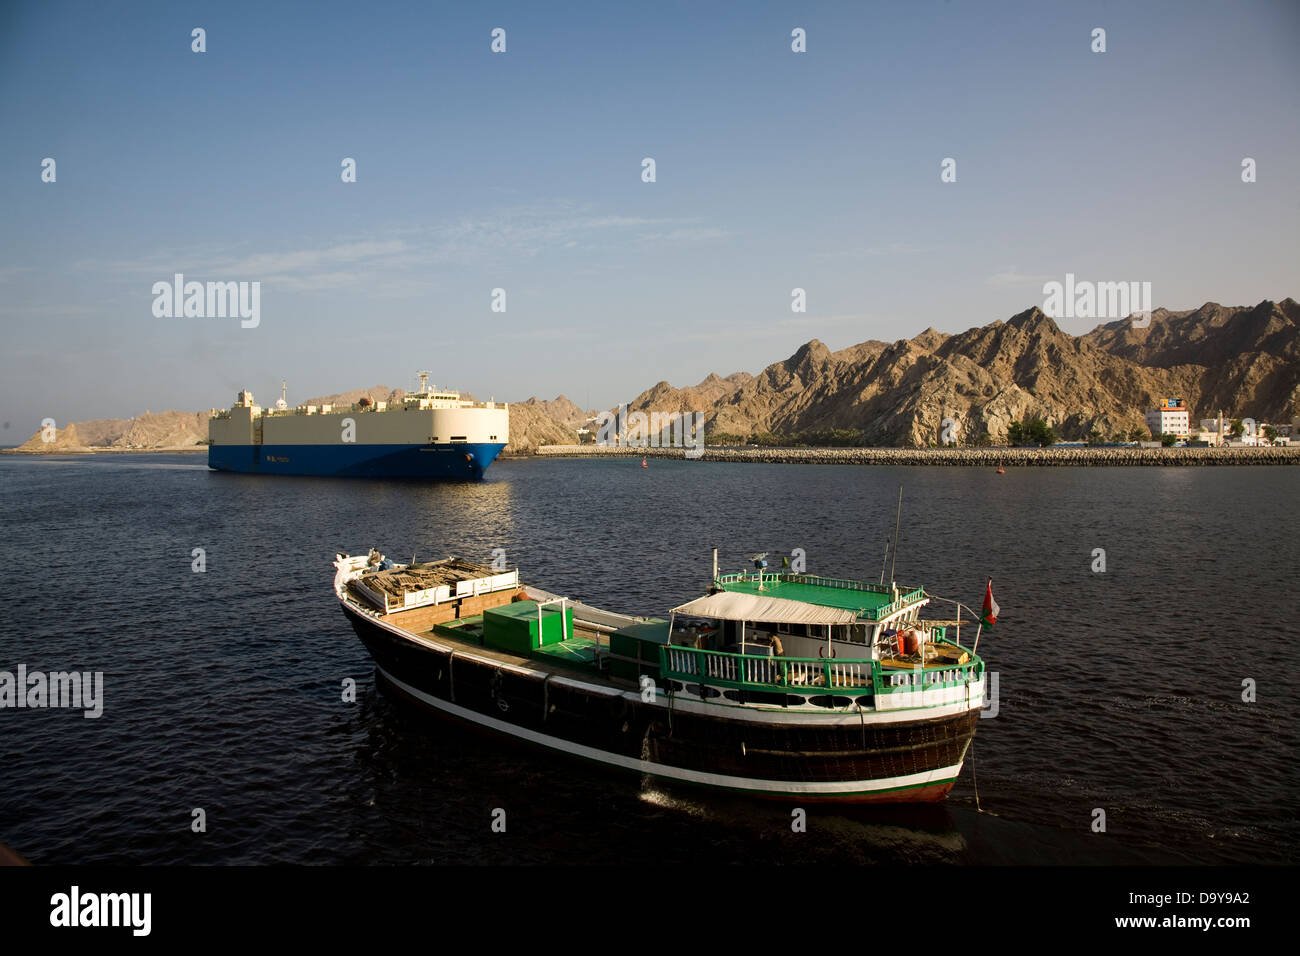 Dhows of traditional design are used for cargo runs and strike quite a contrast with mammoth cargo vessels, Muscat Harbor, Oman Stock Photo